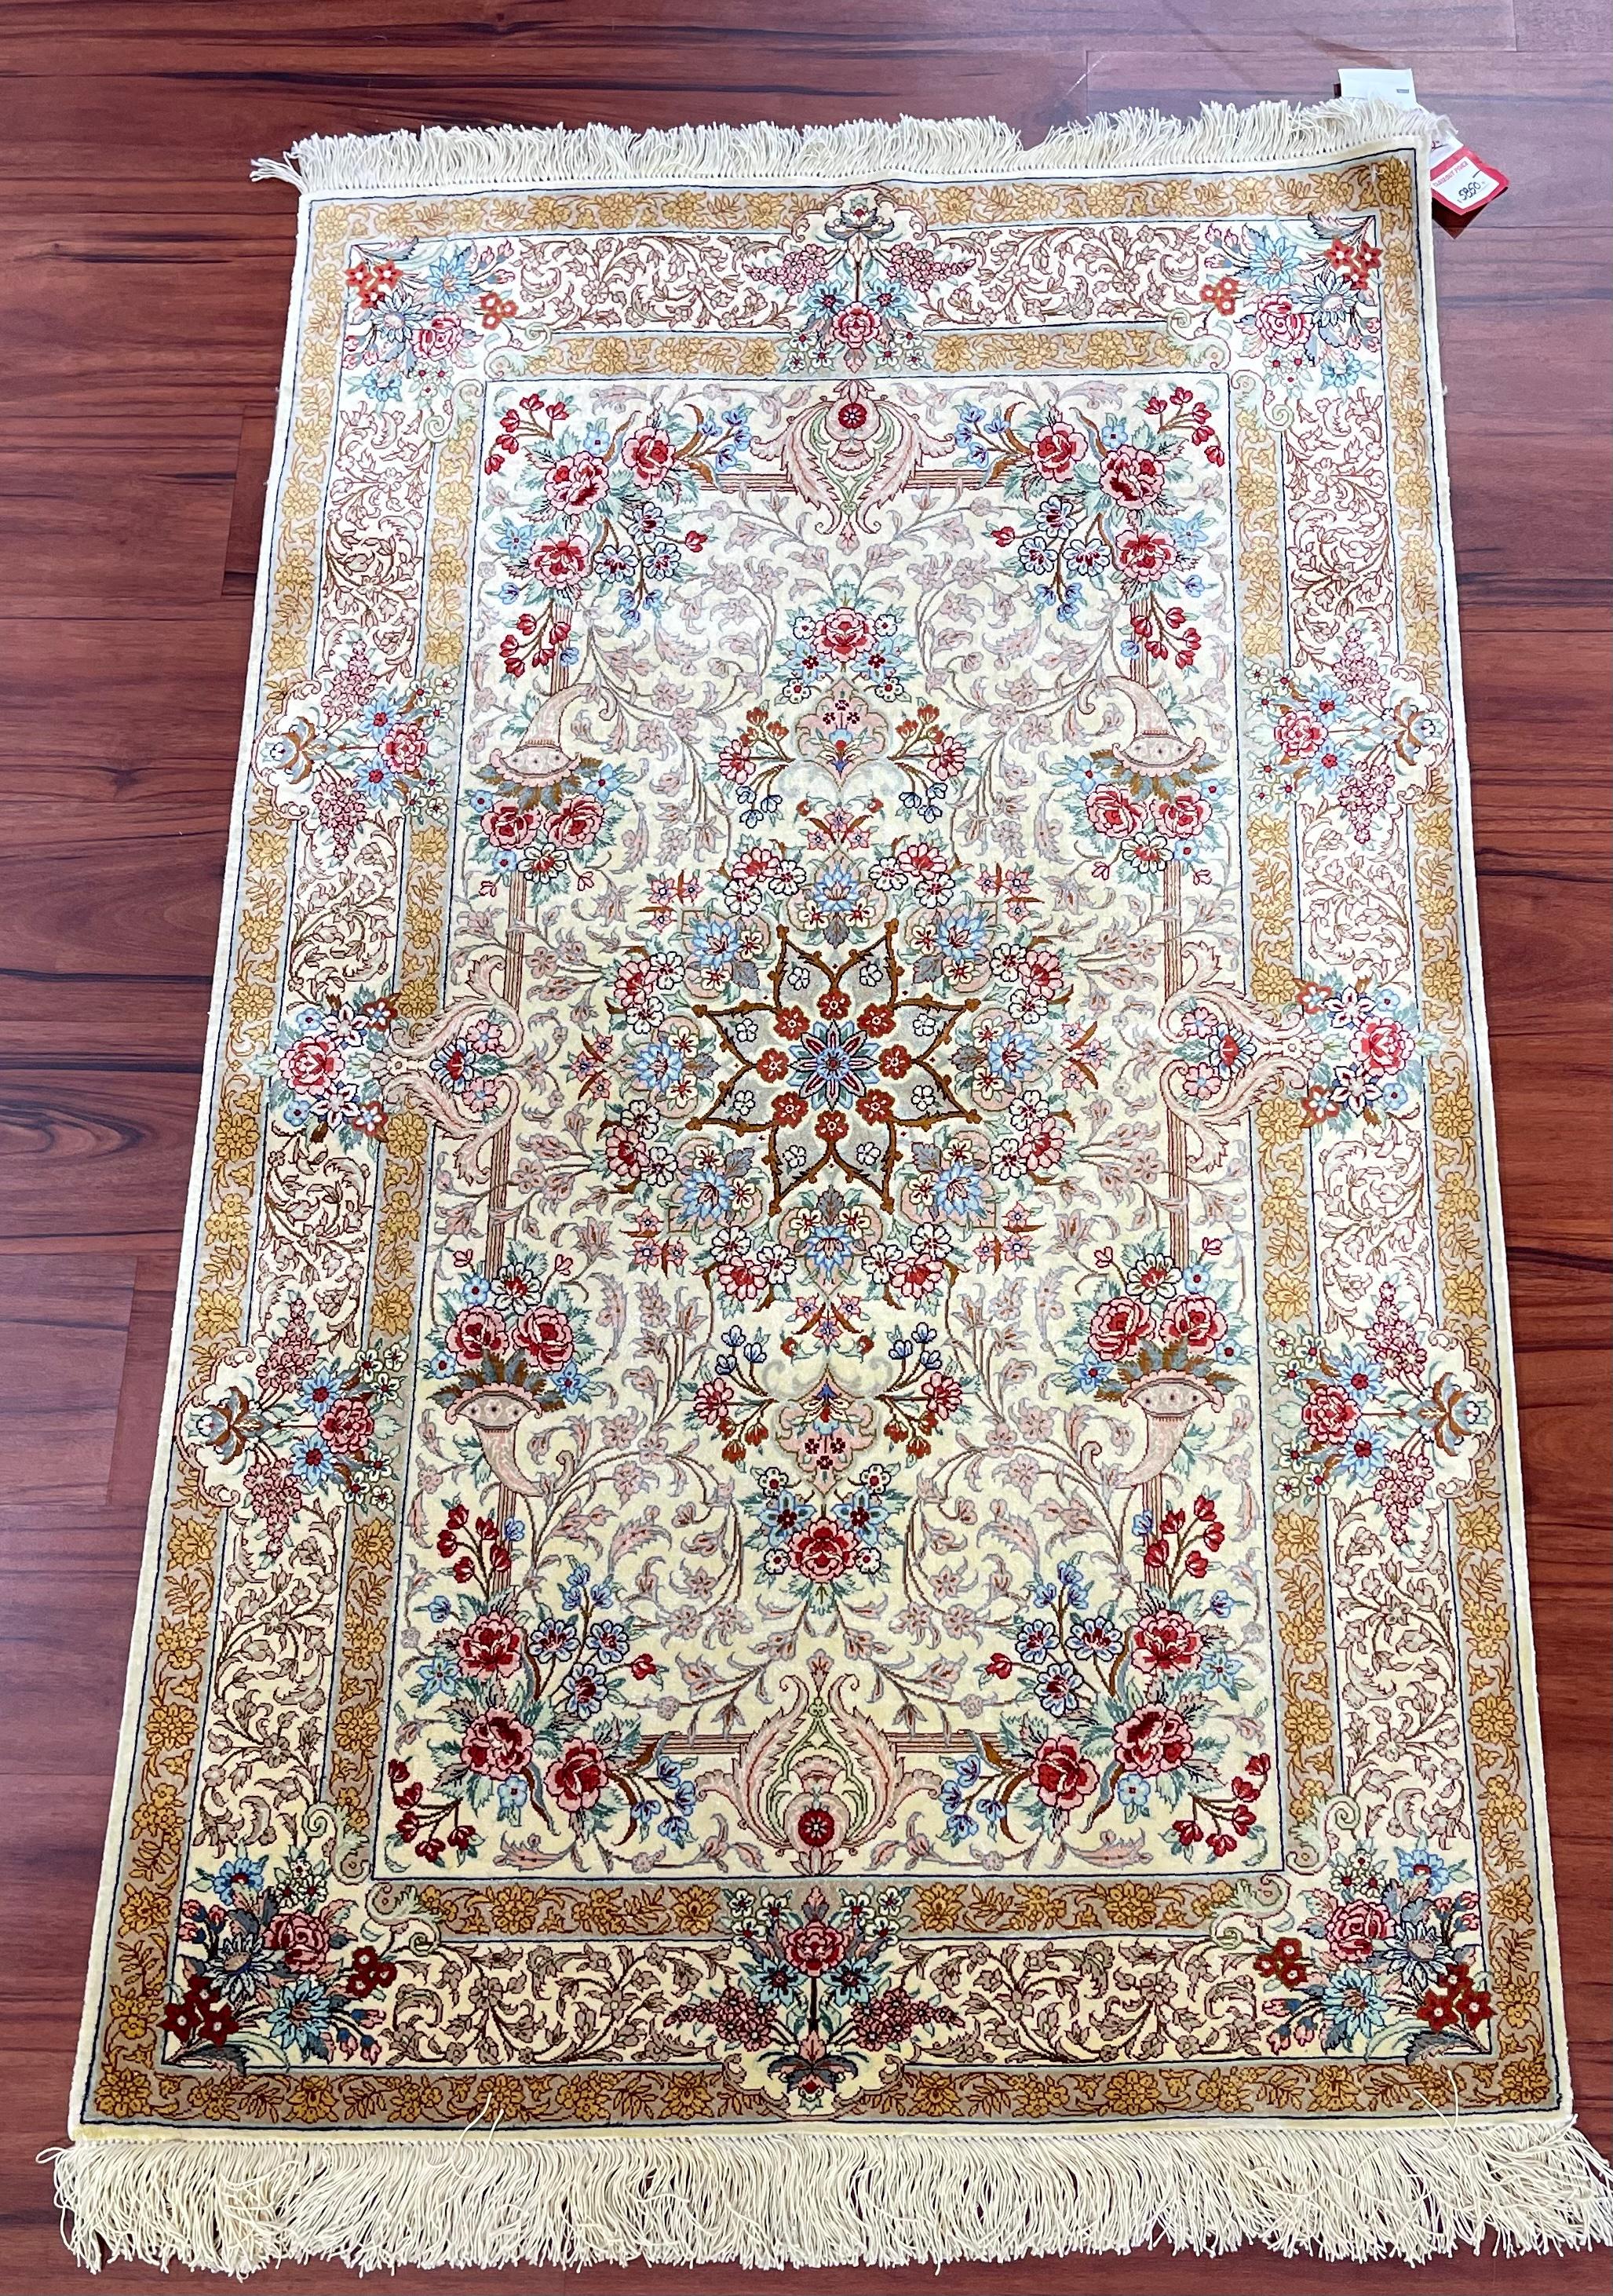 A stunning 100% Silk Persian Qum Rug that originates from Iran in the late 20th century. This piece is fully hand-knotted and is in excellent condition. Feel free to message me any questions regarding this rug or any other listed on my page!